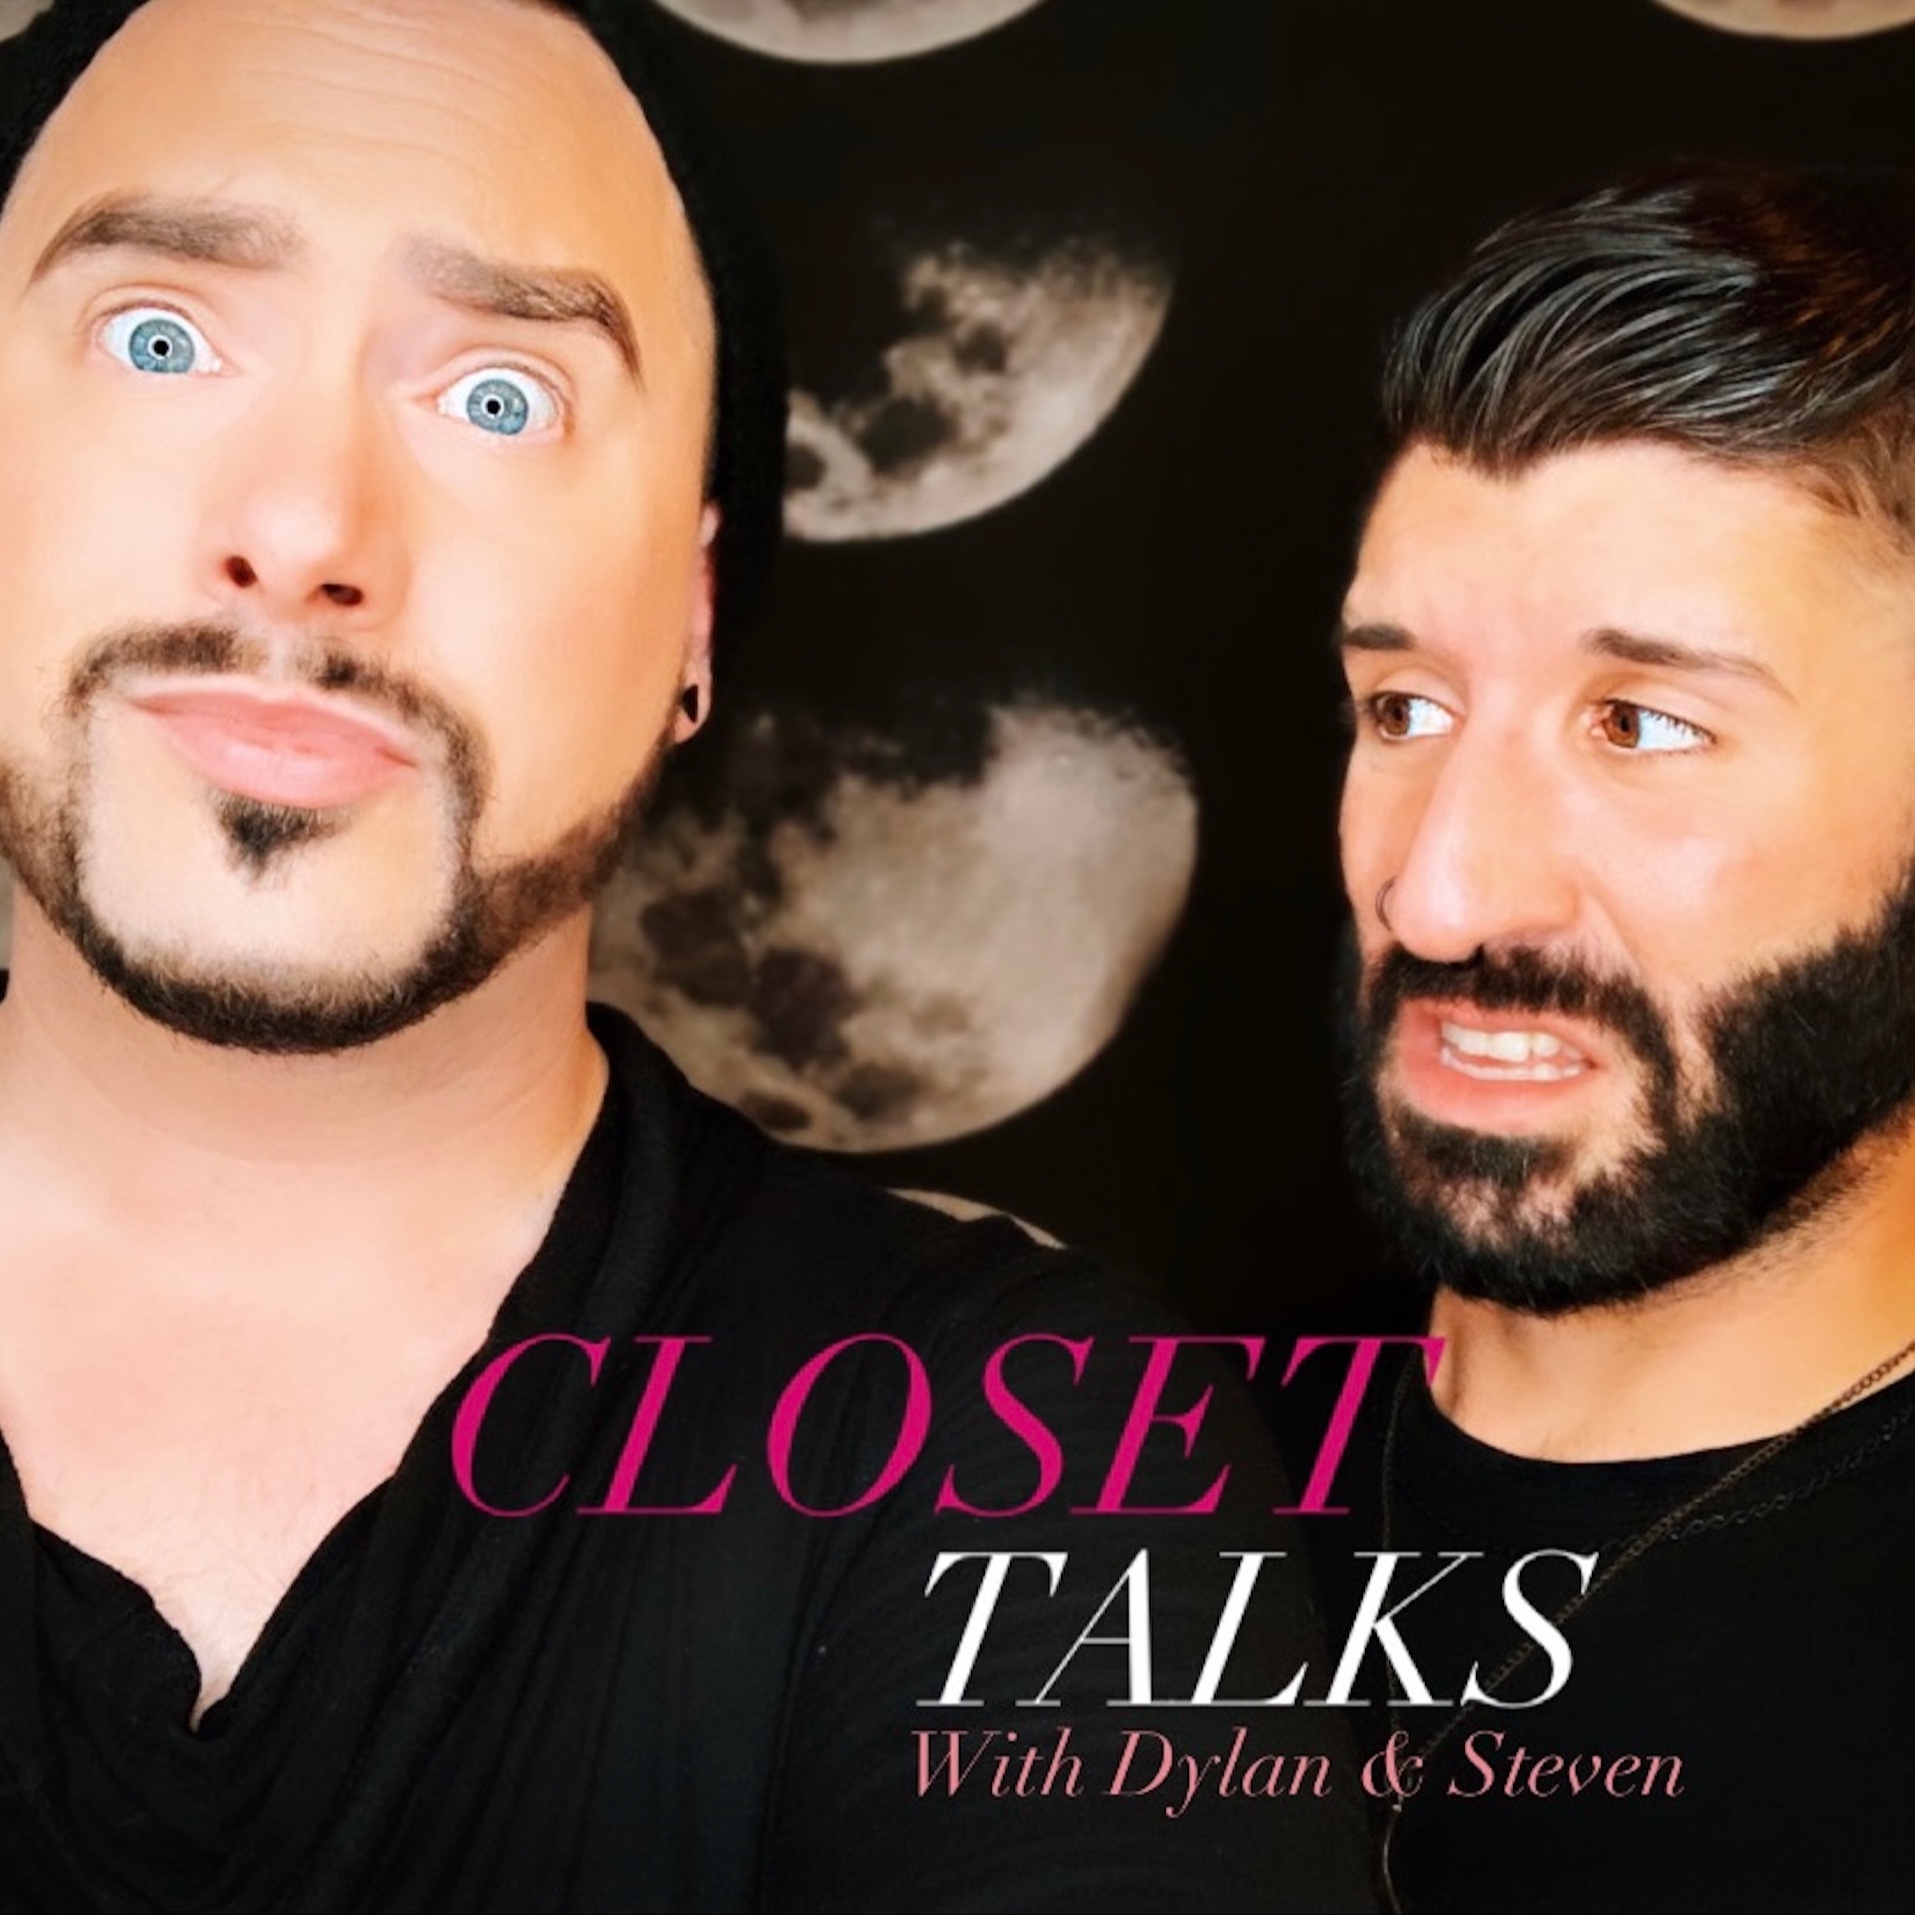 Closet Talks! With Dylan and Steven